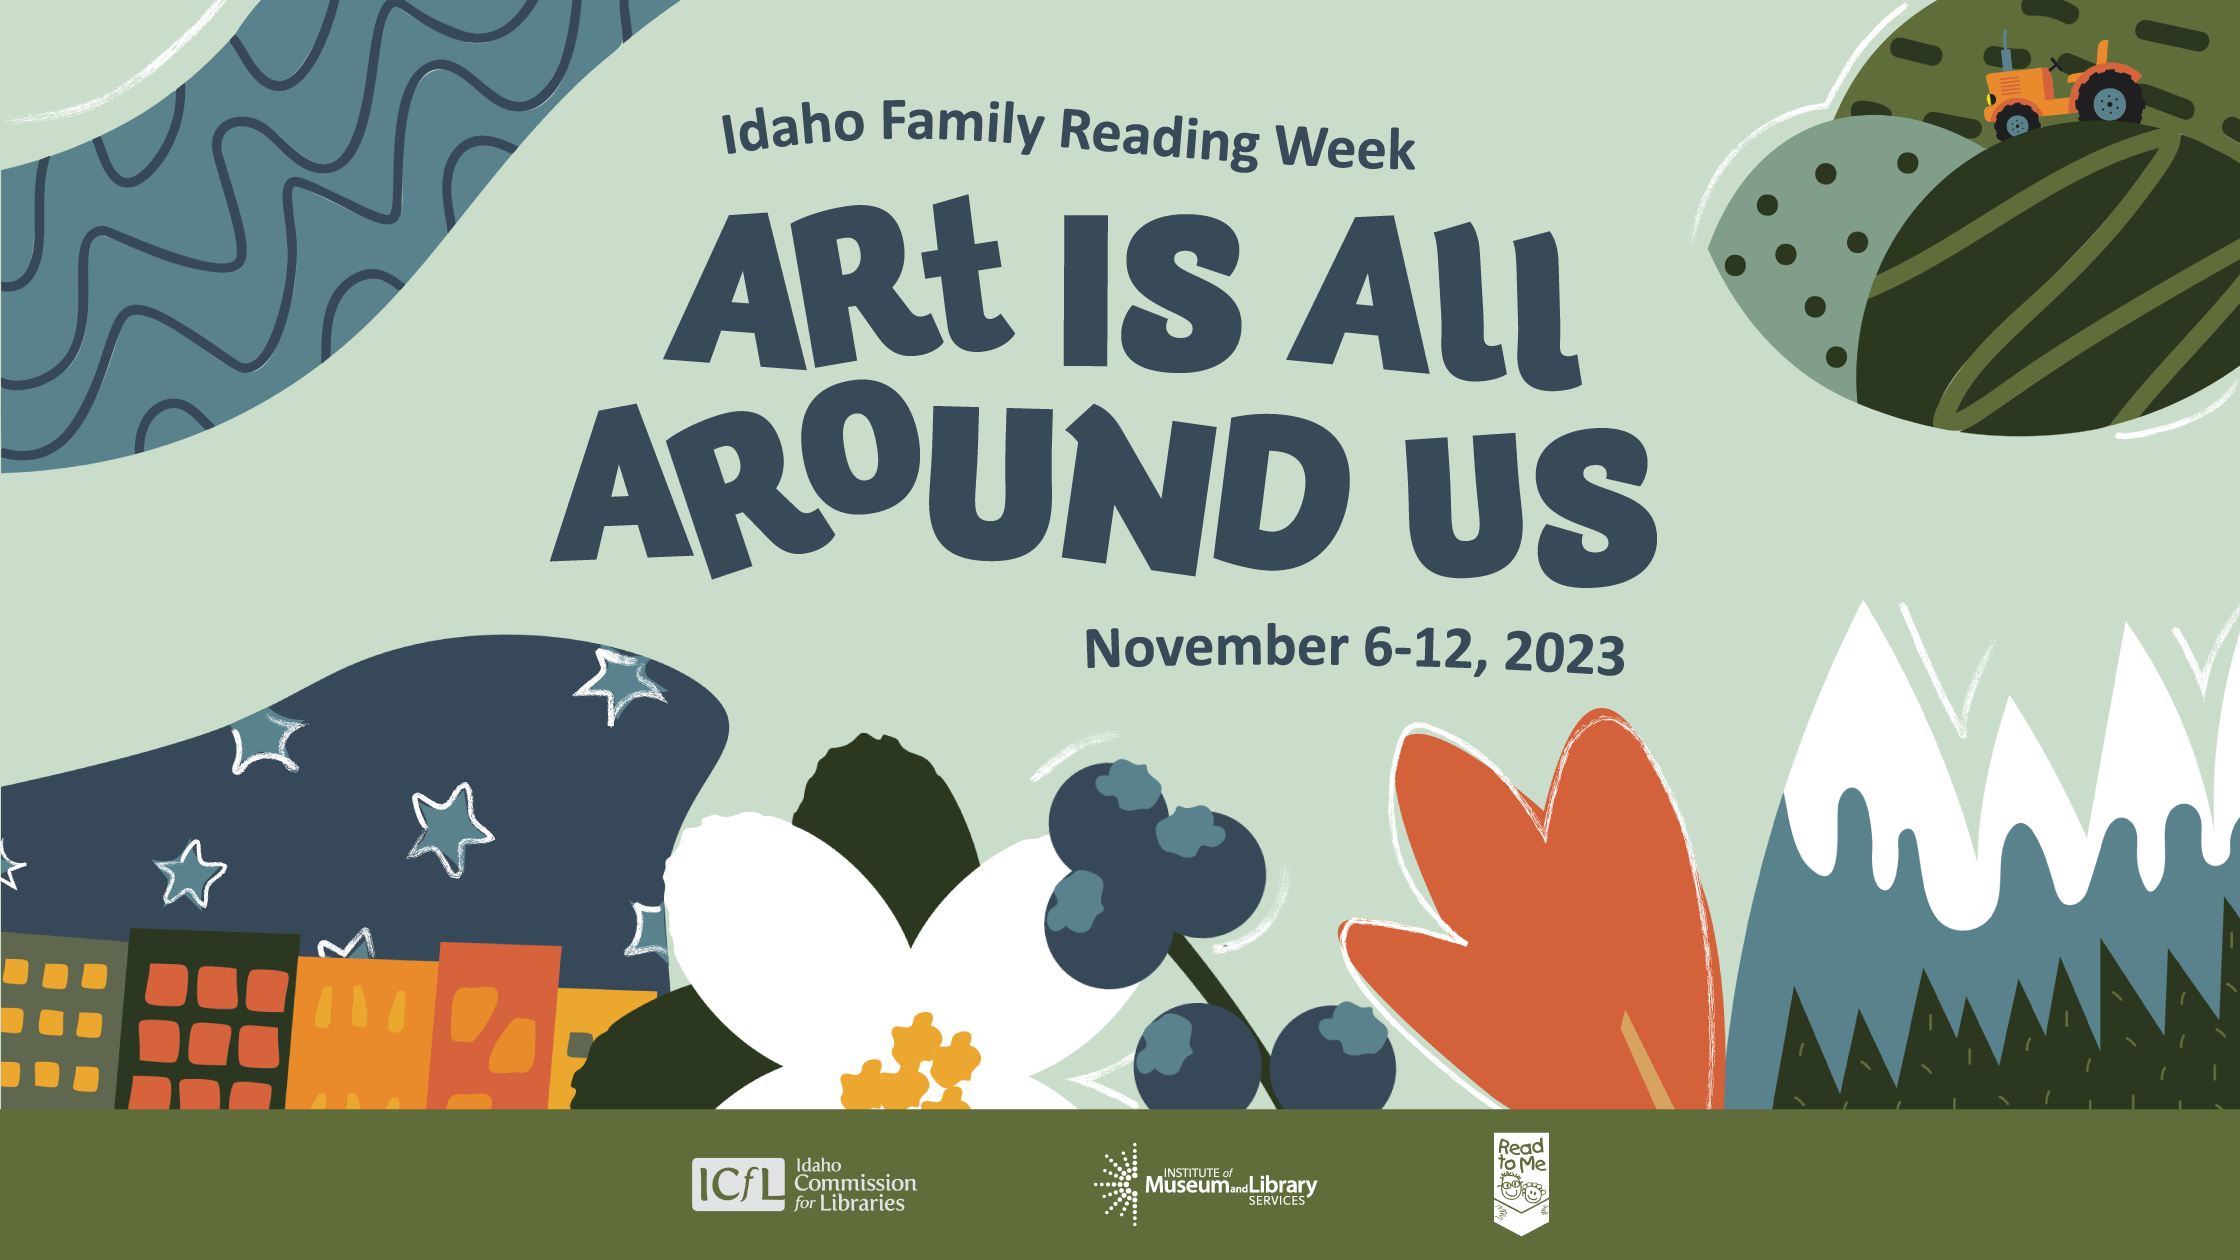 Illustration of various Idaho landscapes, including a city skyline, mountains, farmland, and a river with the text 2023 Idaho Family Reading Week: Art is All Around Us, November 6-12, 2023